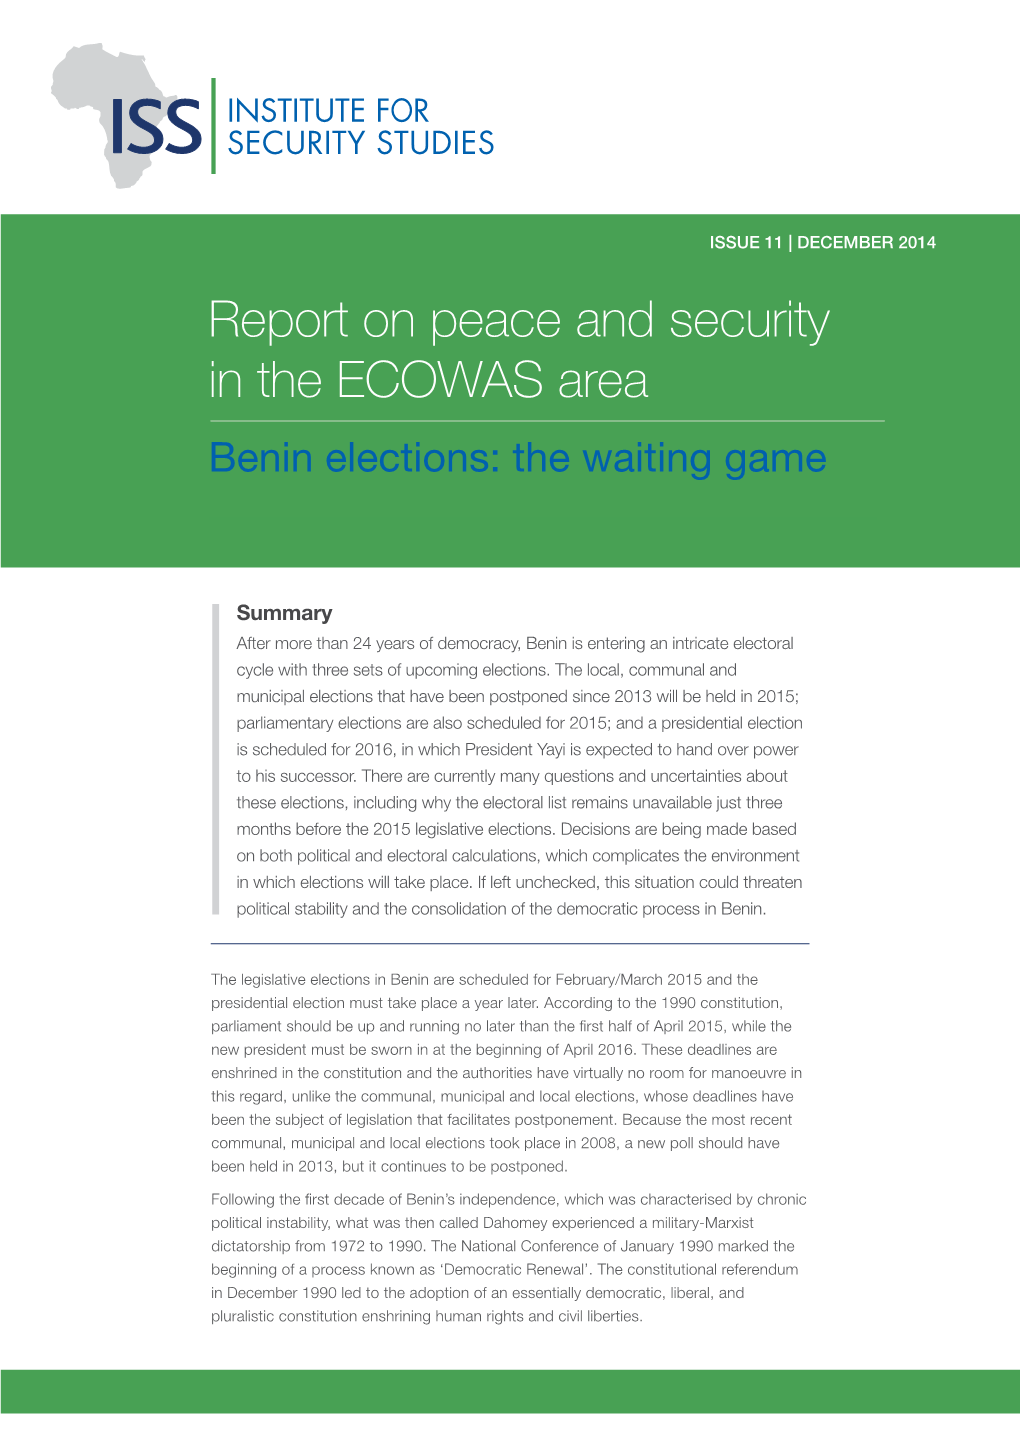 Report on Peace and Security in the ECOWAS Area Benin Elections: the Waiting Game